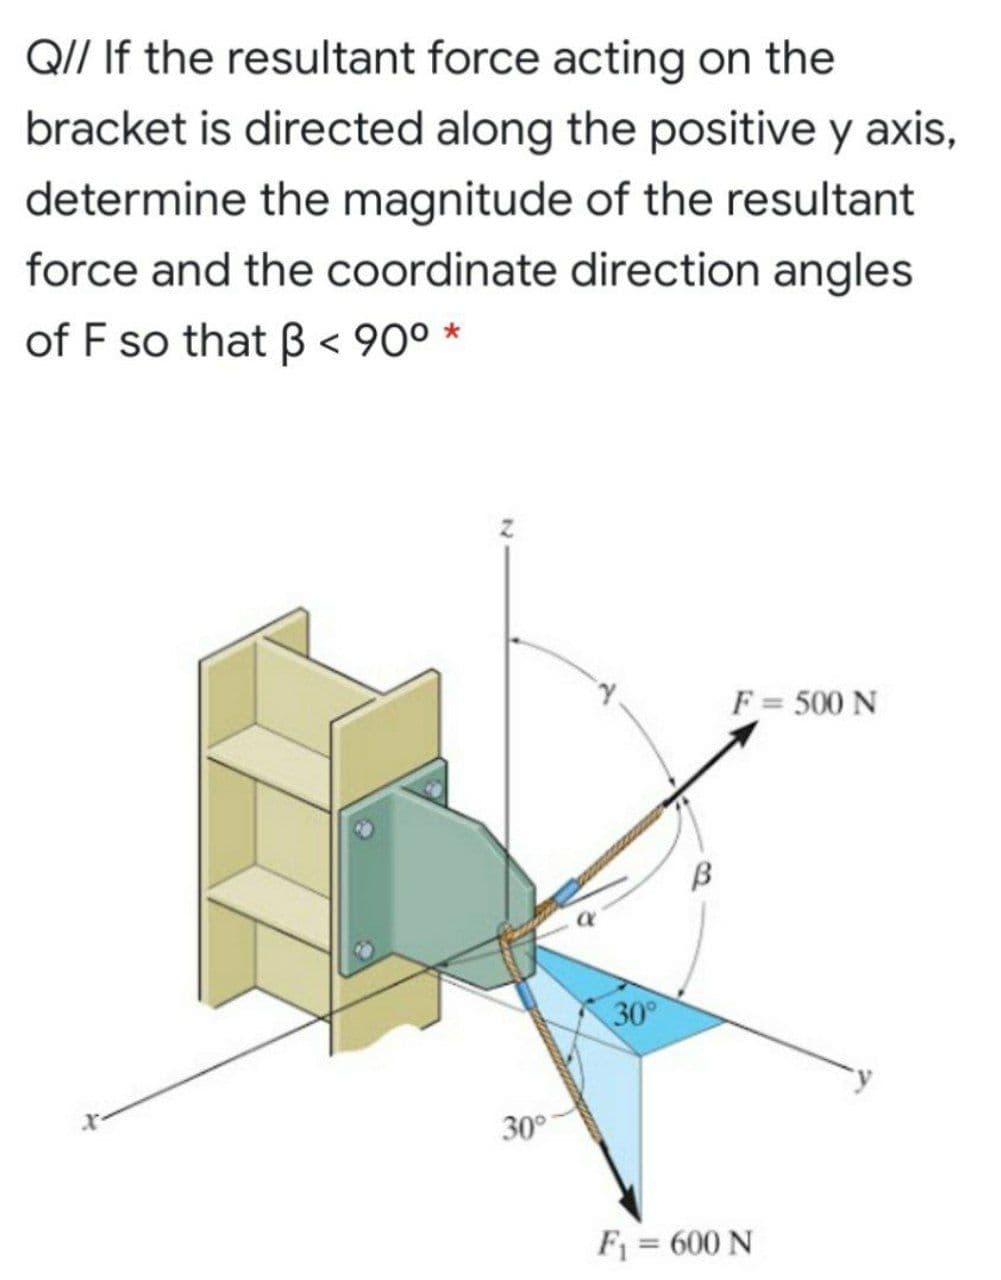 QI/ If the resultant force acting on the
bracket is directed along the positive y axis,
